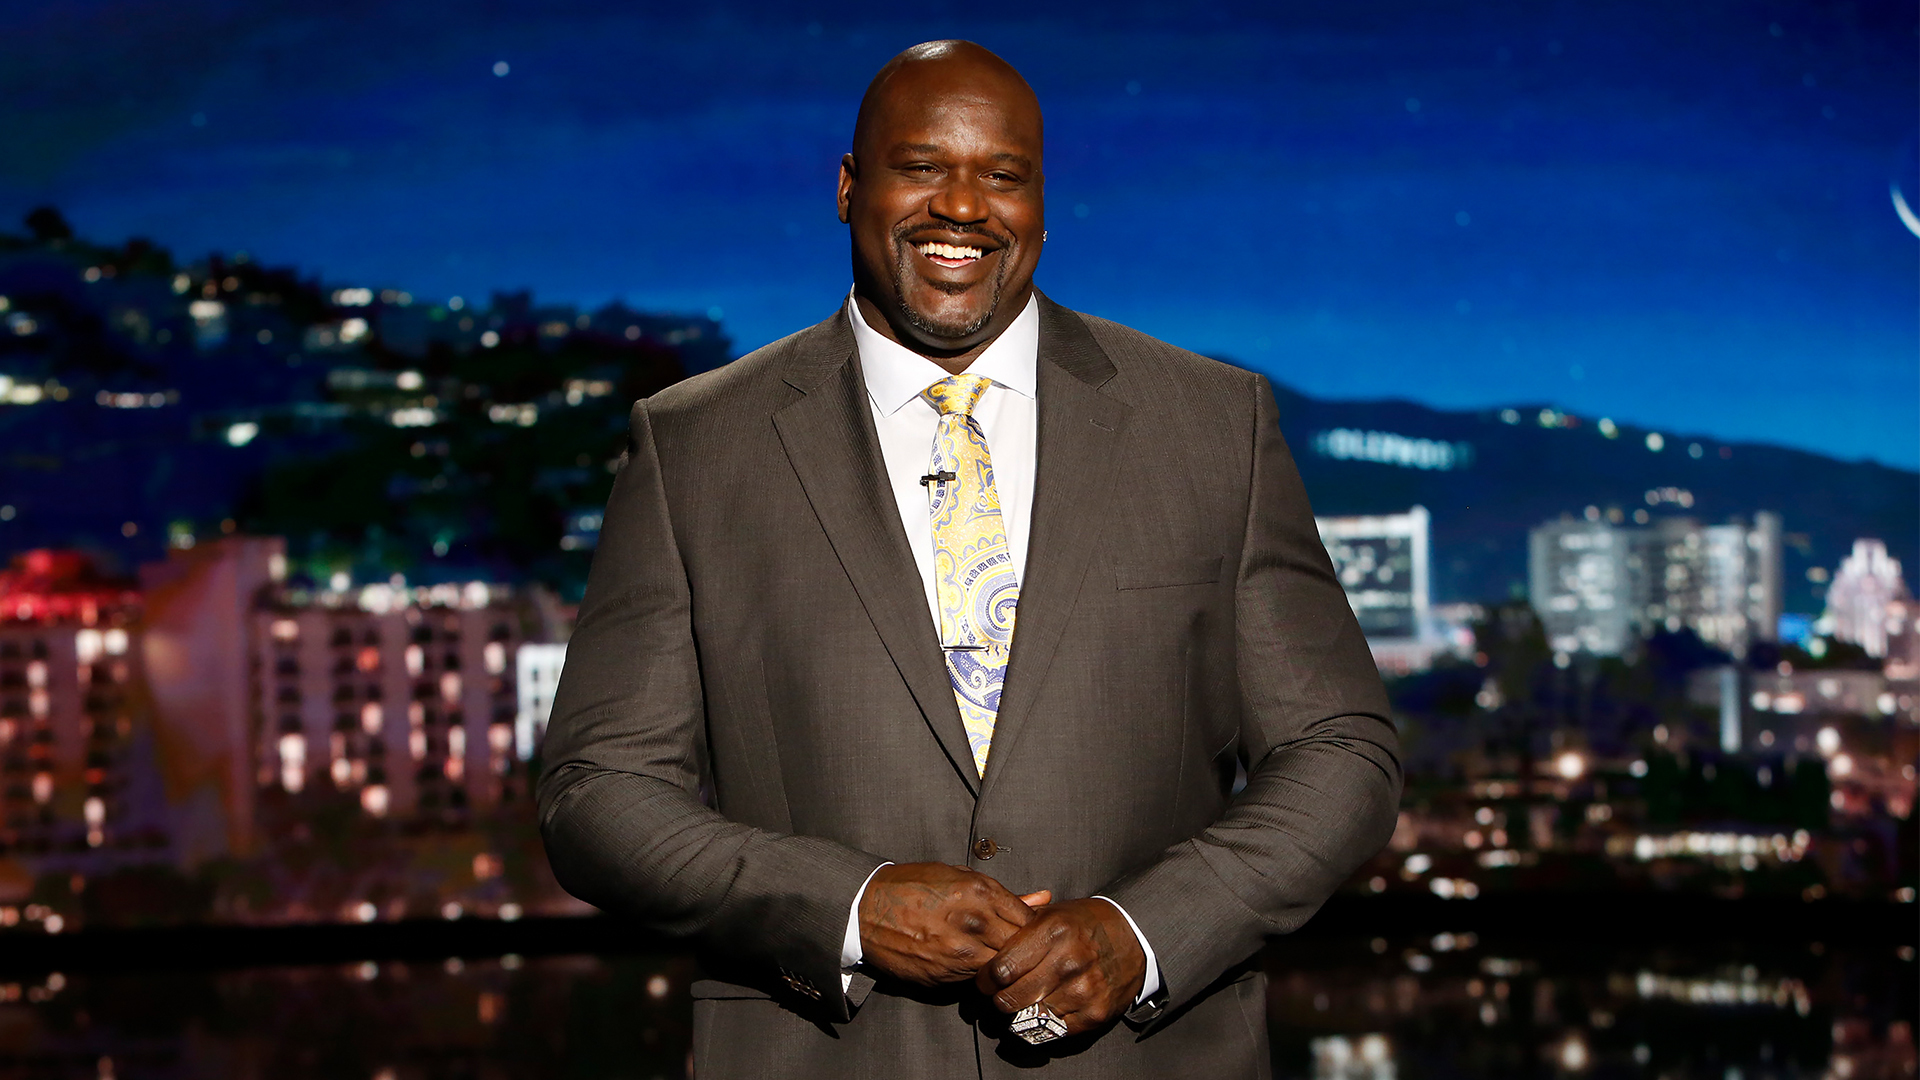 Shaquille O'Neal Has A $400M Fortune, But Did You Know He Sold The Rights To Manage His Name And Likeness To Authentic Brands Group?